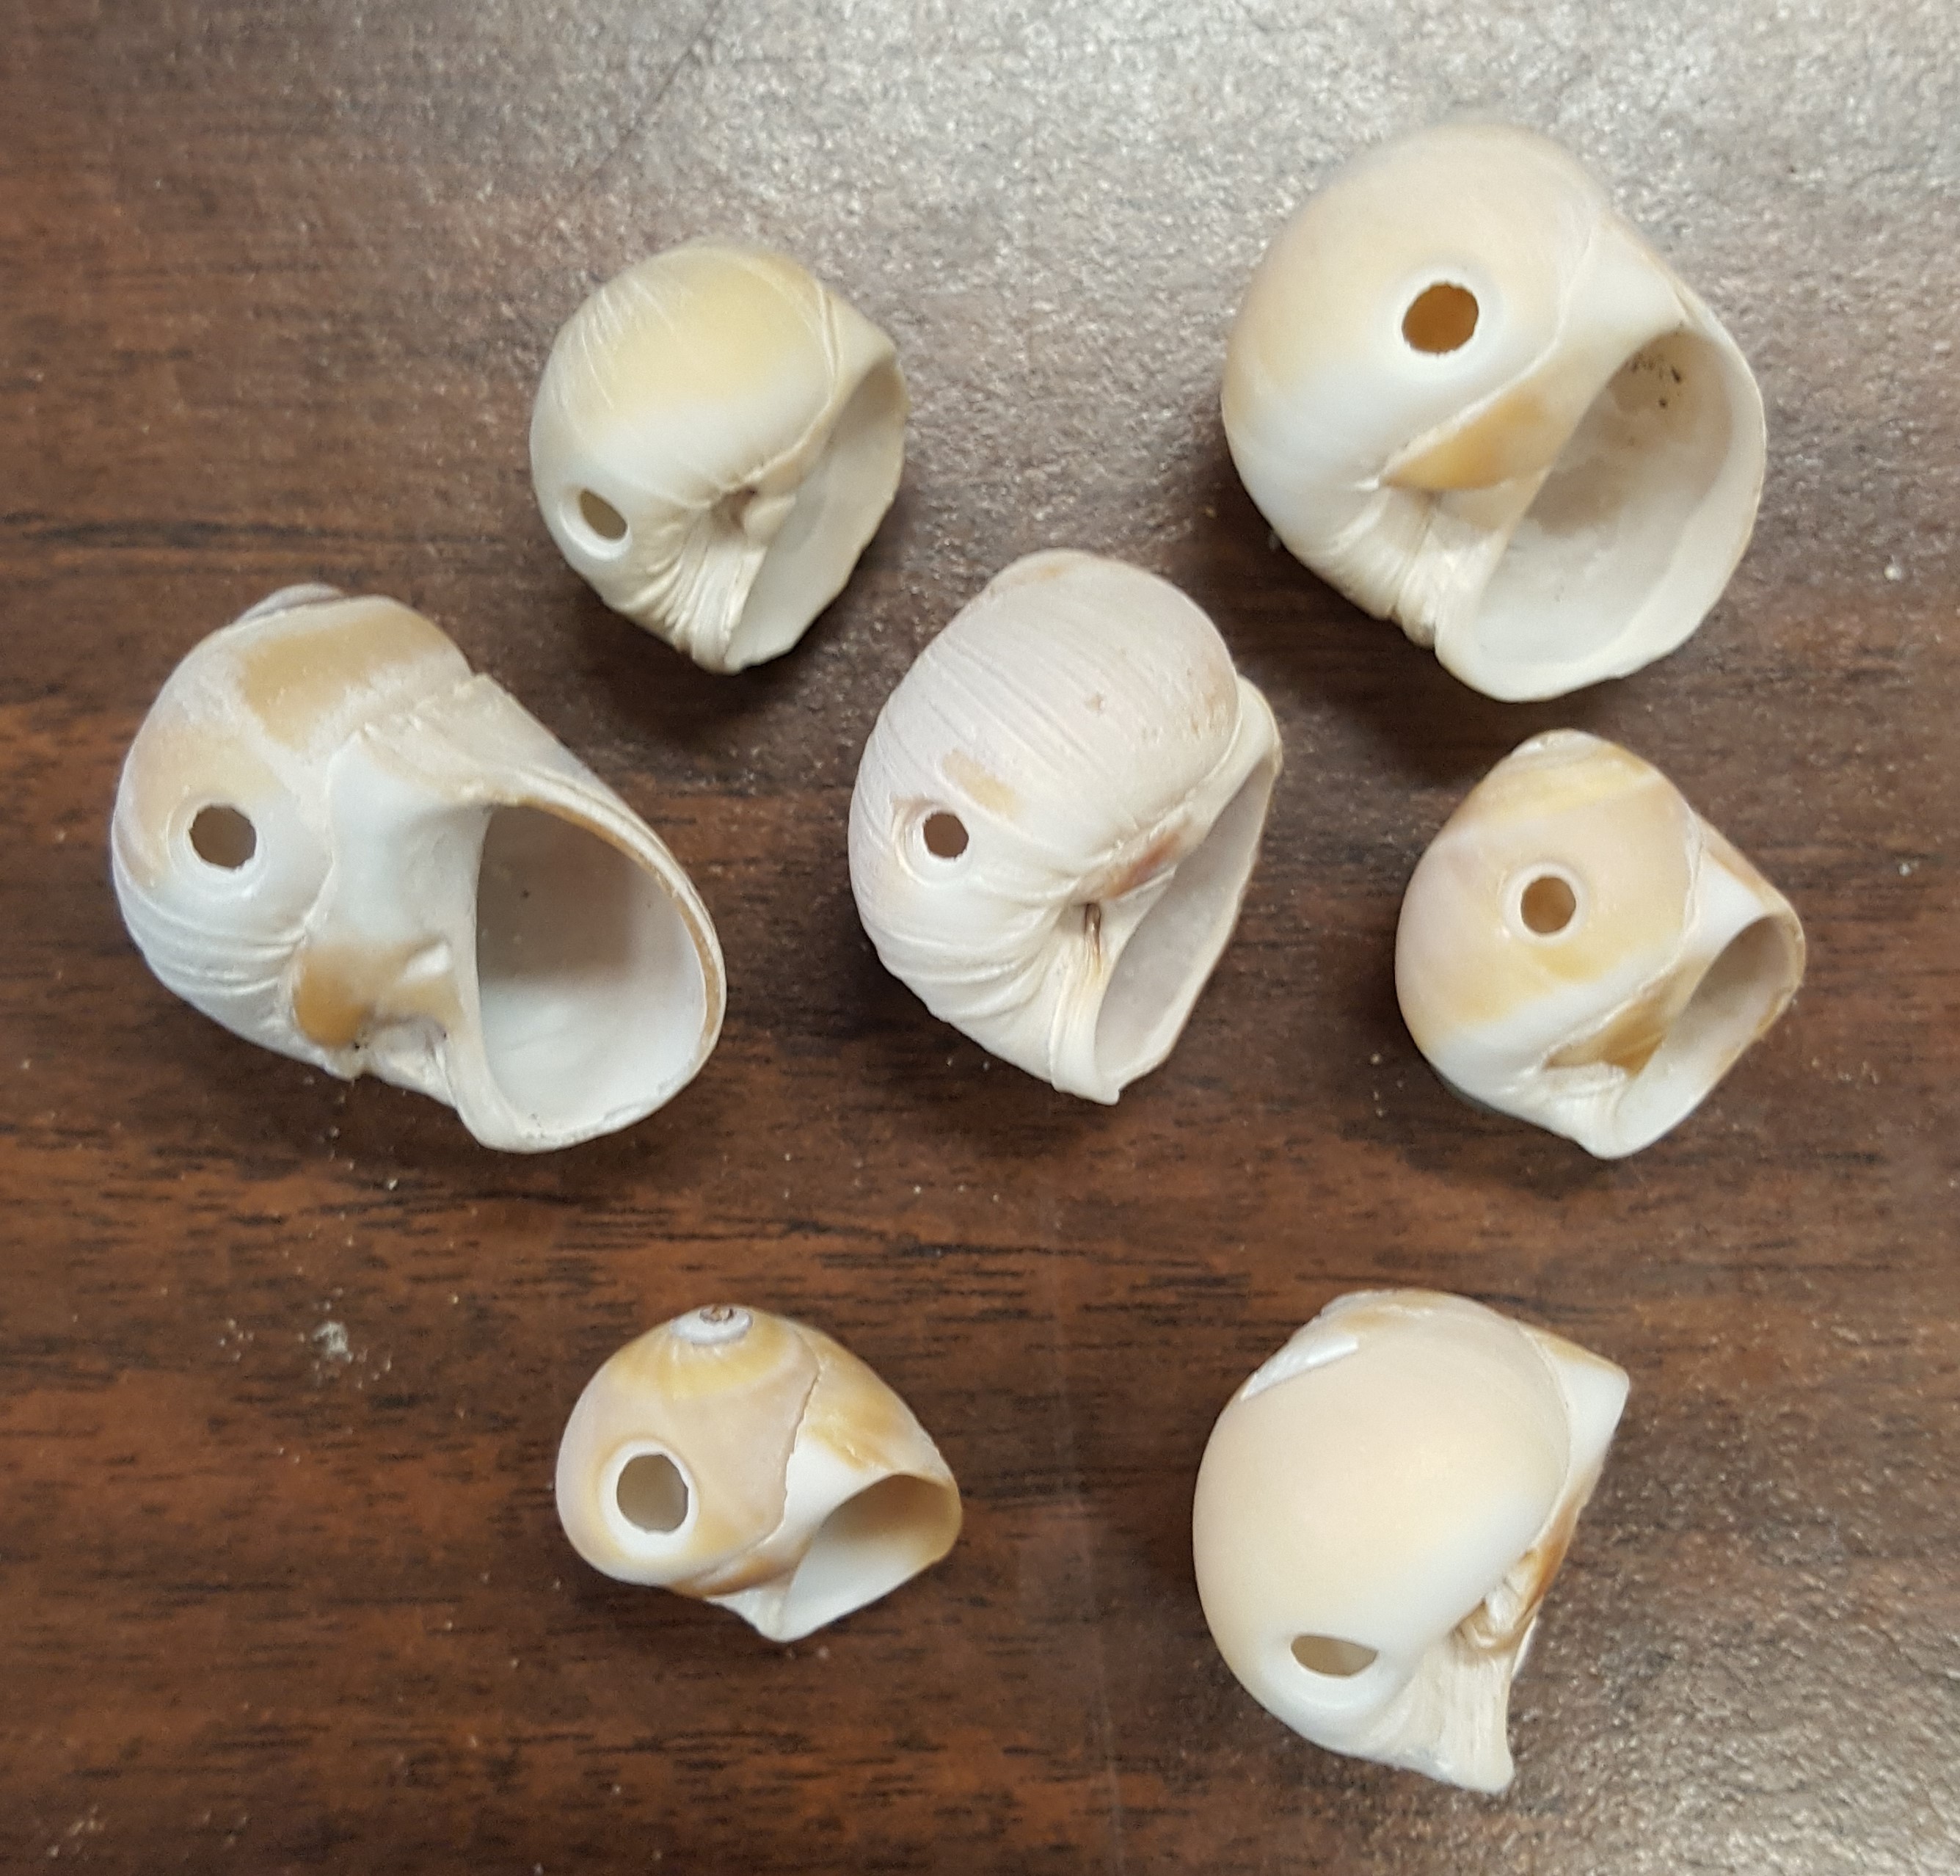 several modern naticid gastropods that all have successful beveled drill holes in a similar location on the body whorl. Note that these are smaller individuals that were likely cannibalized by larger individuals.